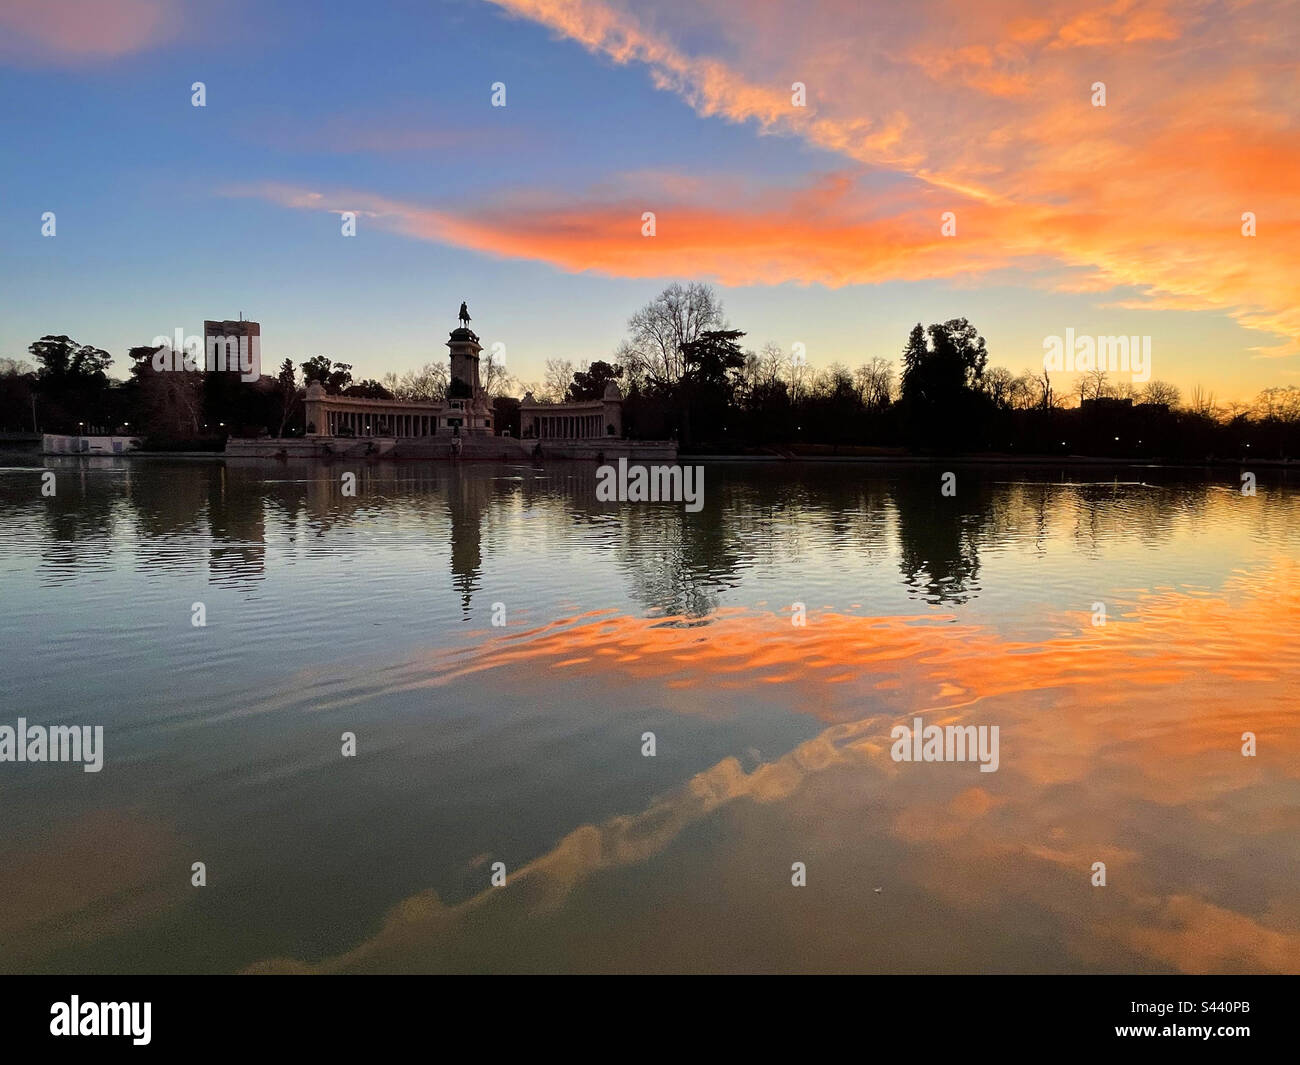 Dawn sky and its reflection on the pond. El Retiro park, Madrid, Spain. Stock Photo